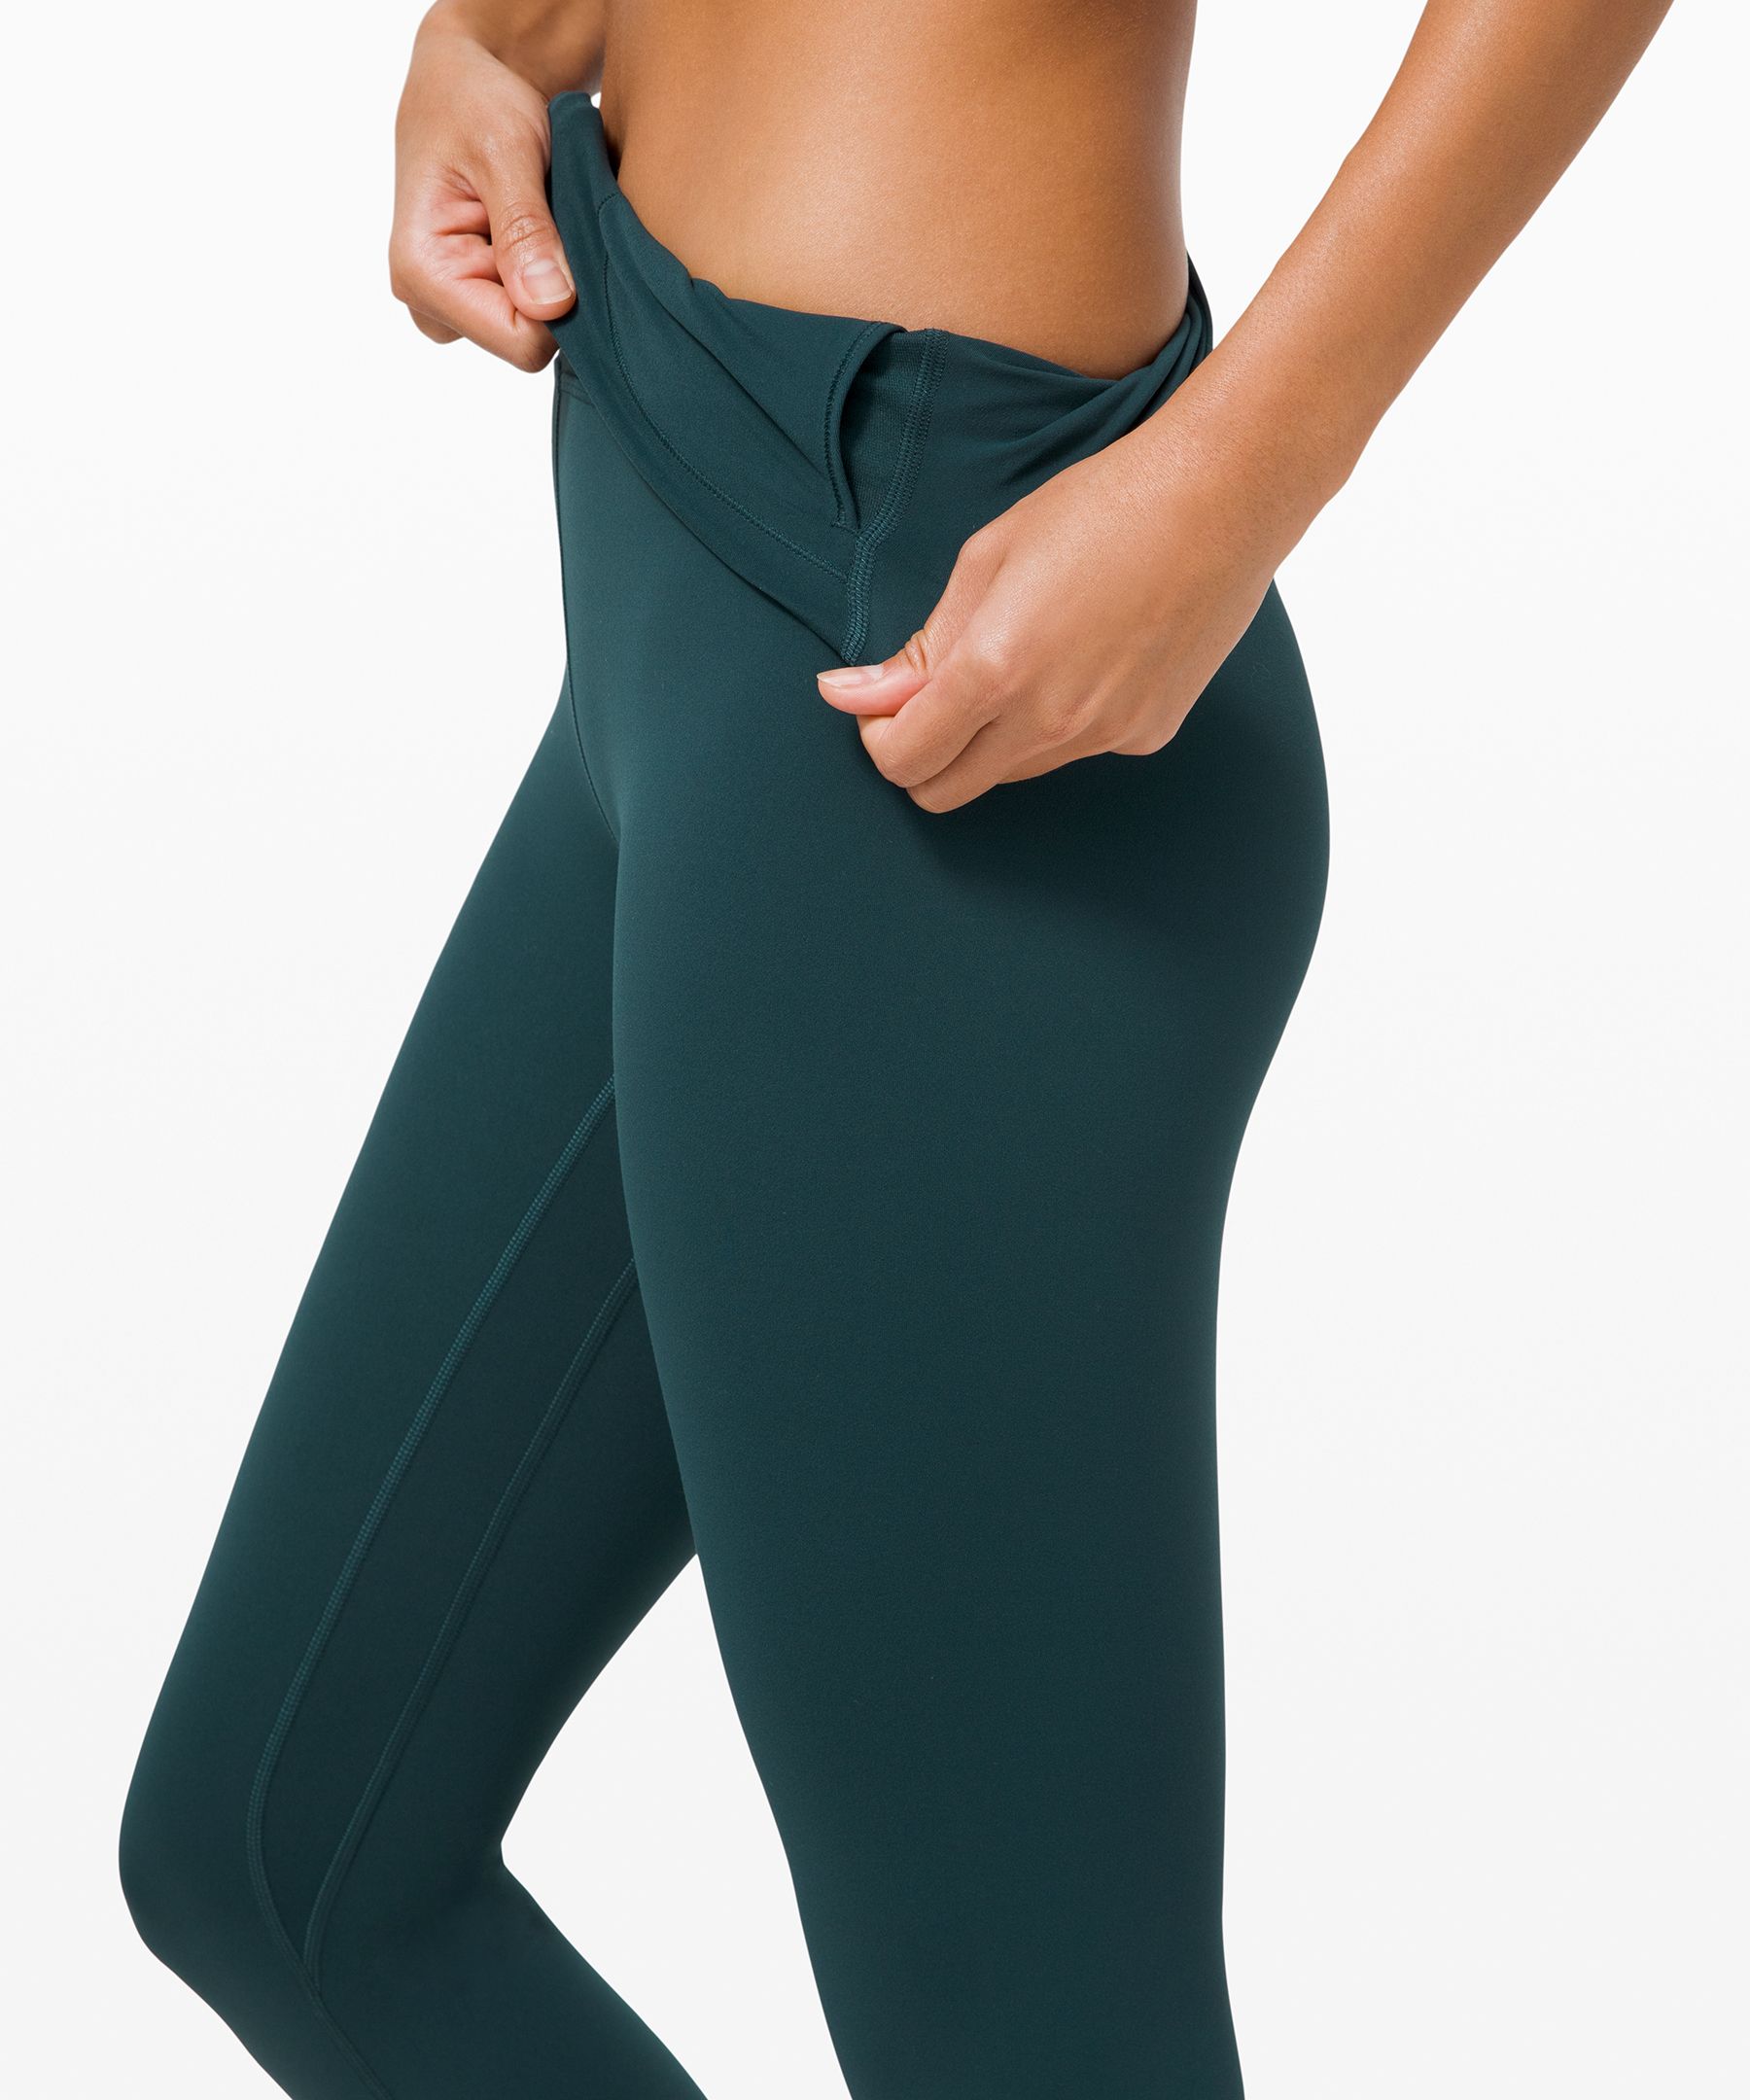 Lululemon Fast and Free High-Rise Tight 25 - Maldives Green